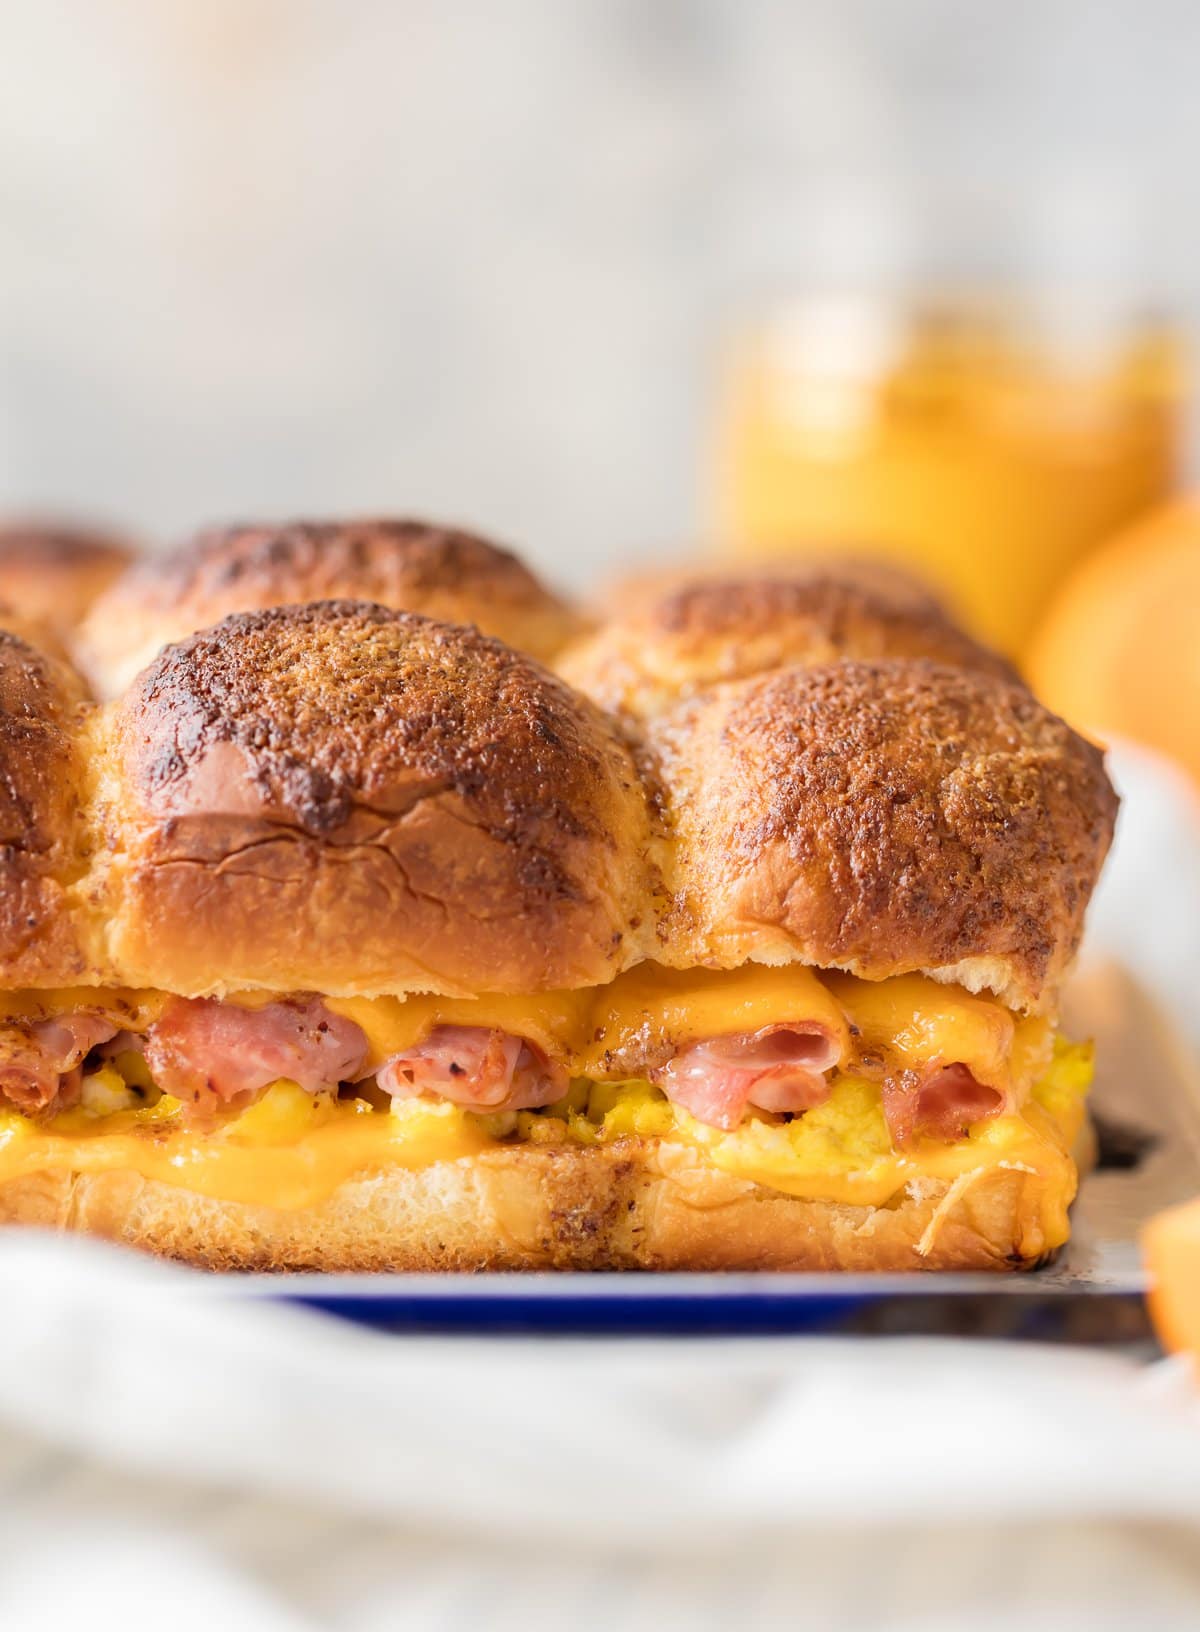 Baked breakfast sliders filled with ham, egg, and cheese